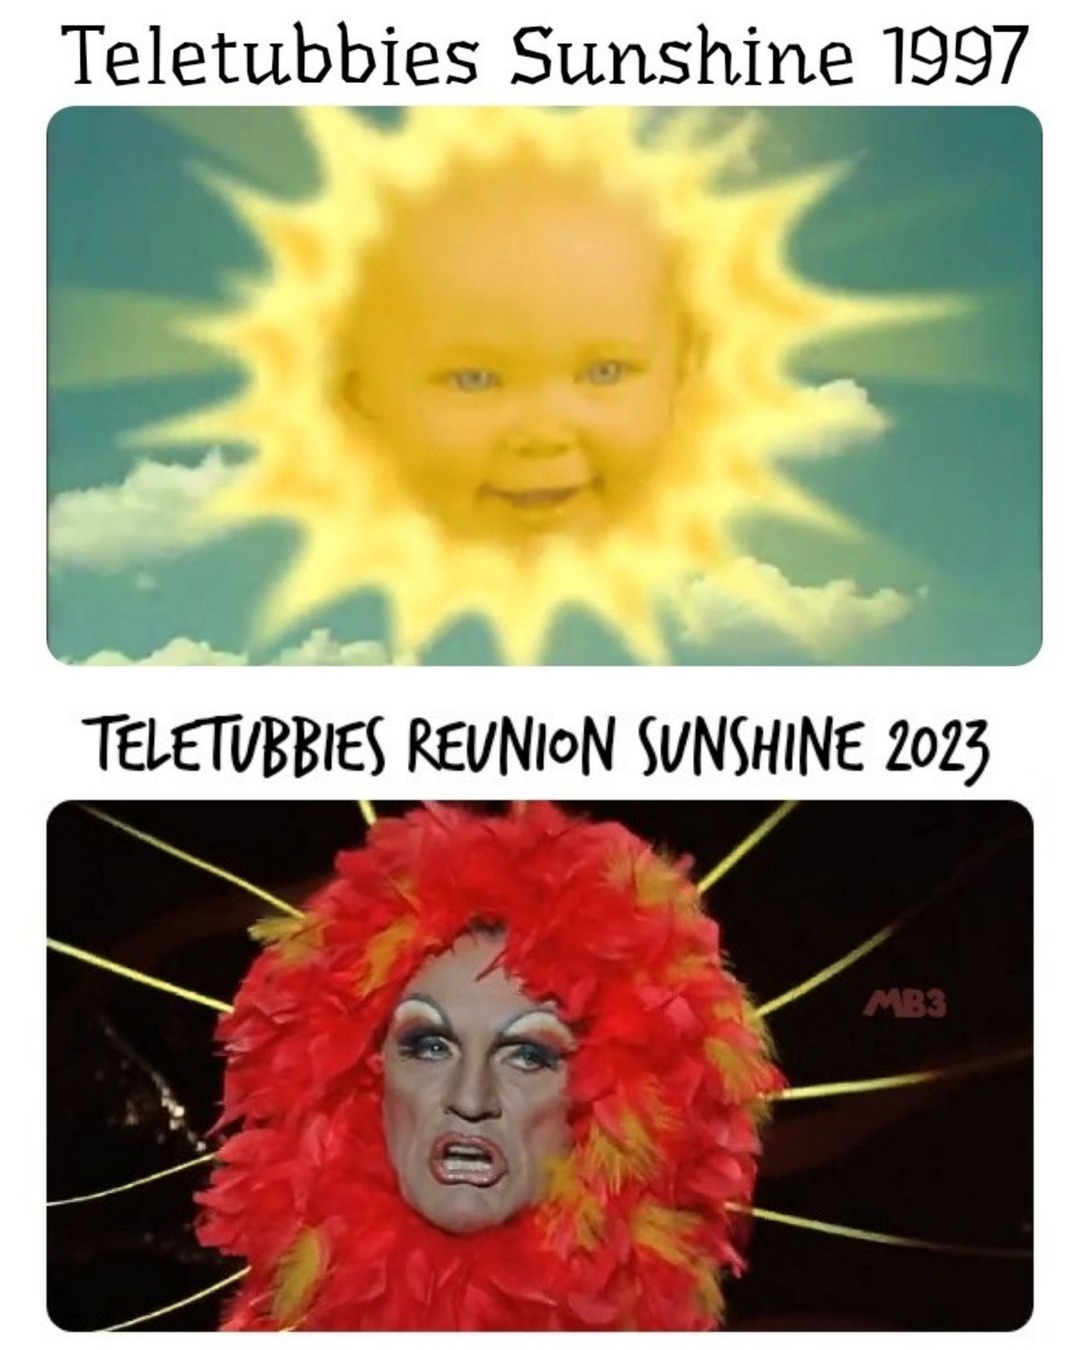 Teletubbies Now and Then - meme